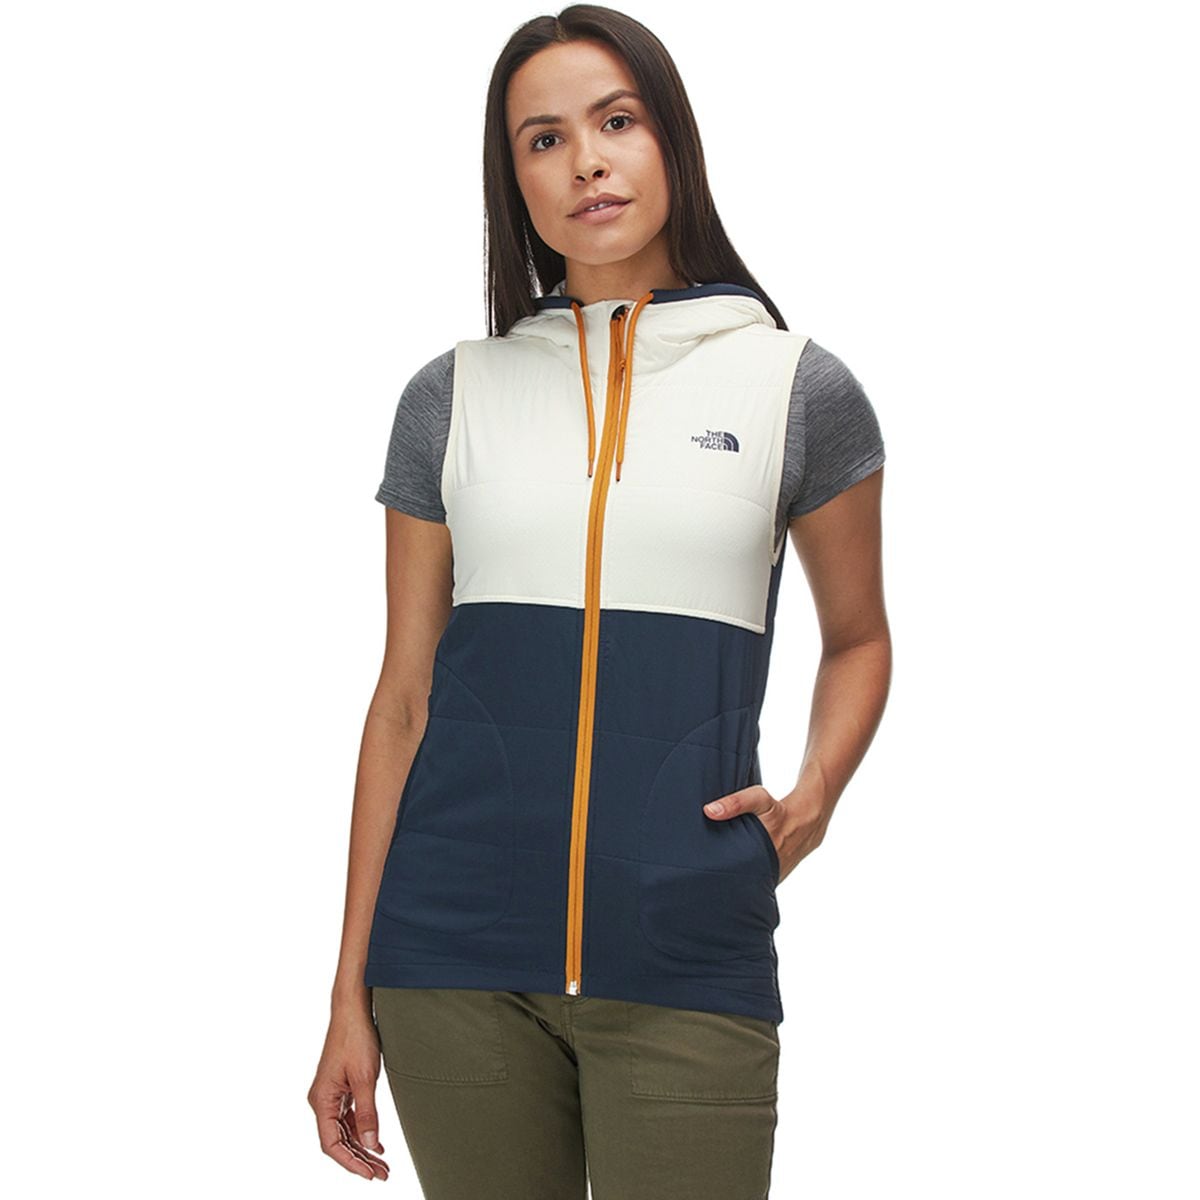 the north face mountain sweatshirt hooded vest